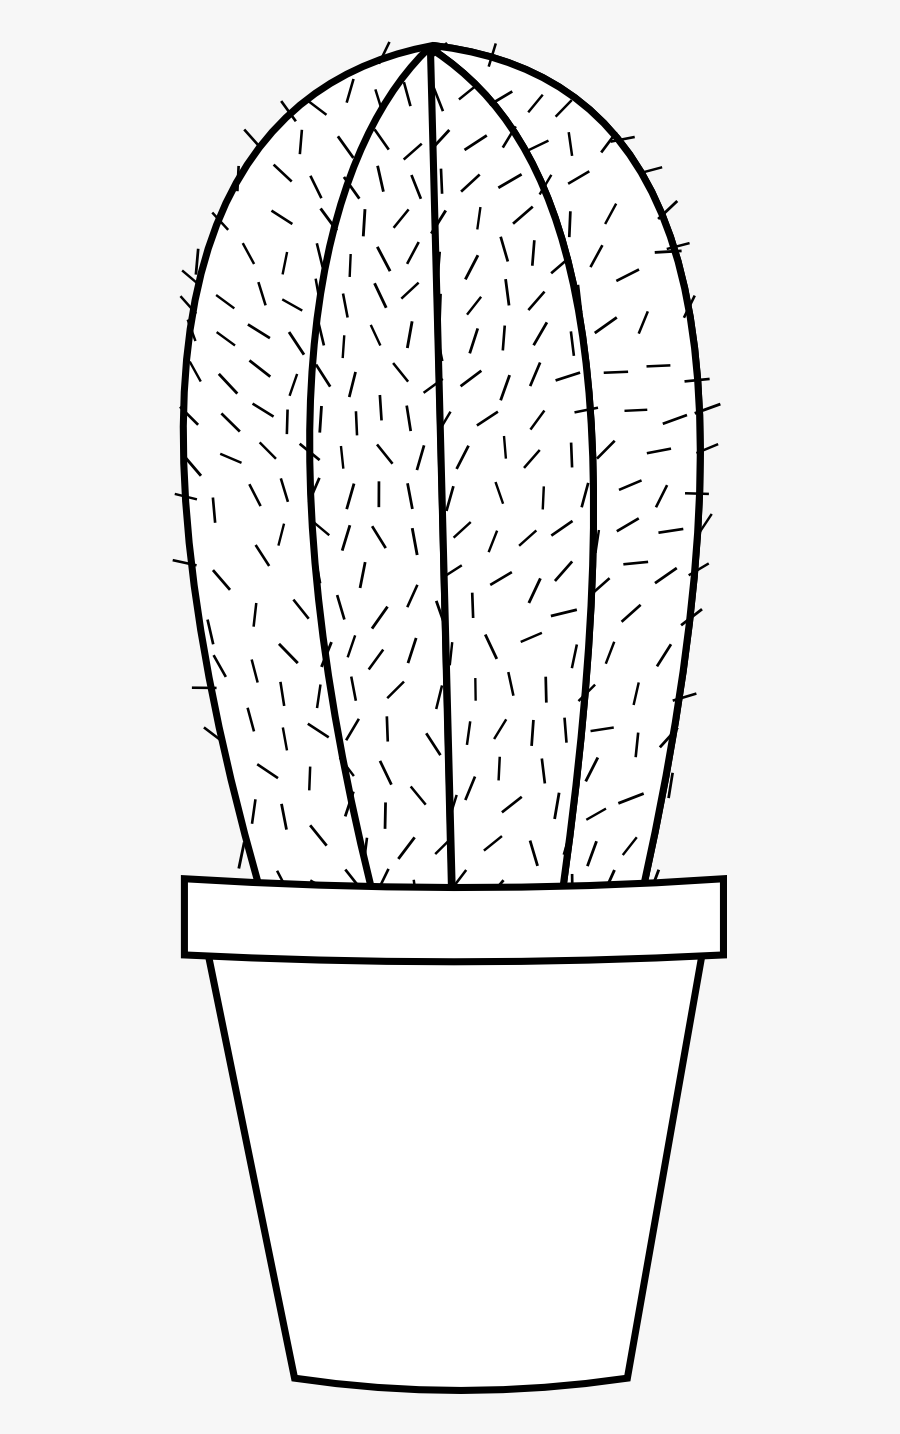 Cactus Clipart Black And - Cactus Clipart Black And White Fre...